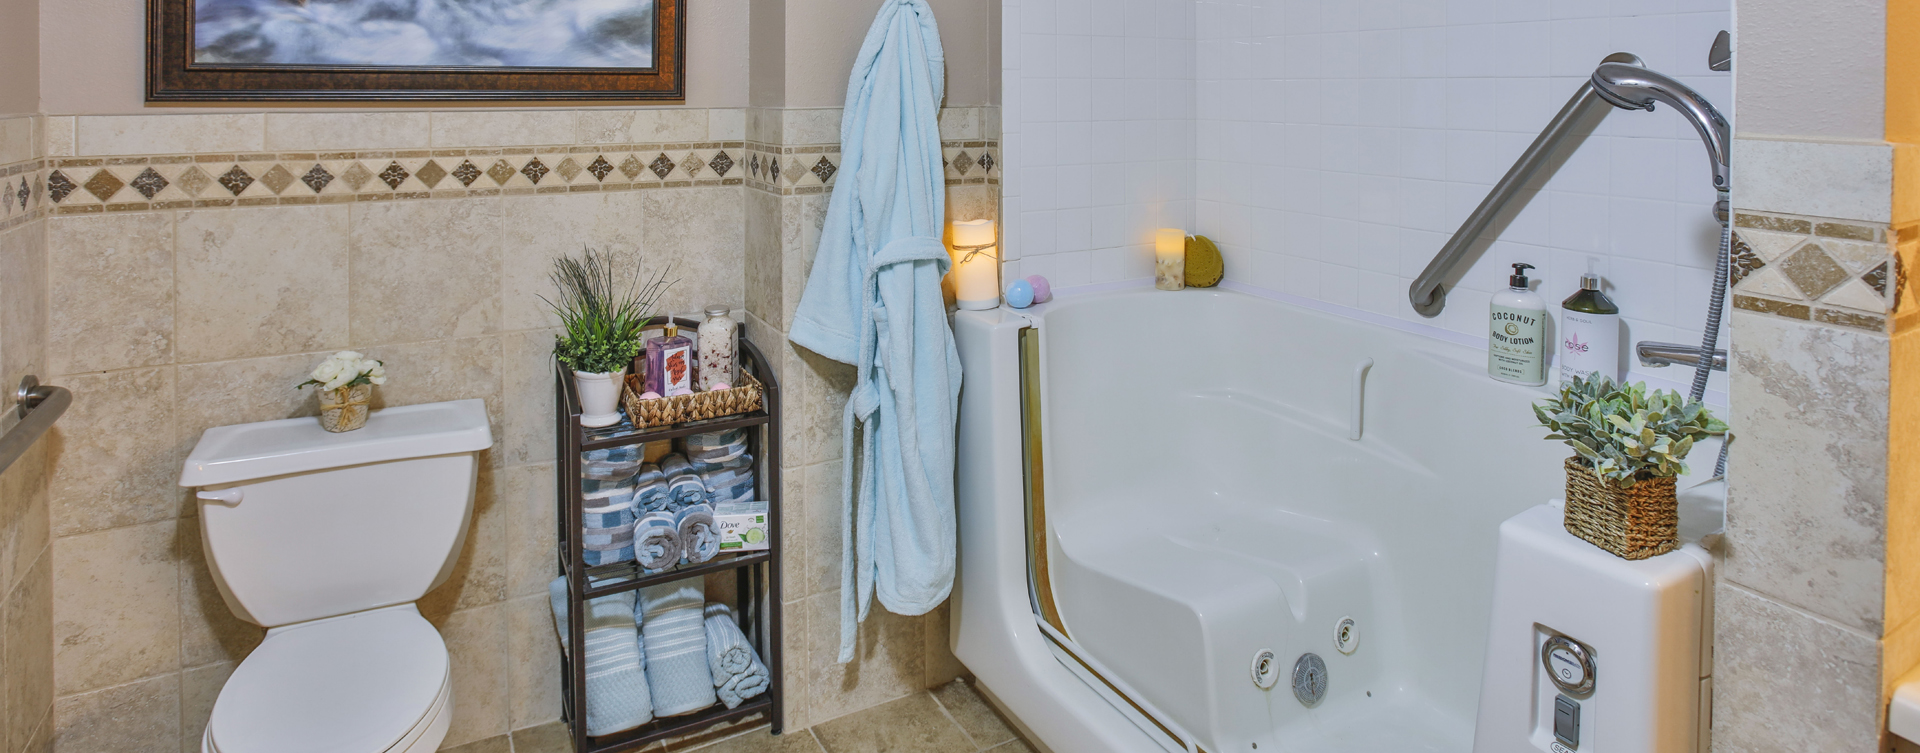 Our whirlpool bathtub creates a spa-like environment tailored to enhance your relaxation and enjoyment at Bickford of Peoria